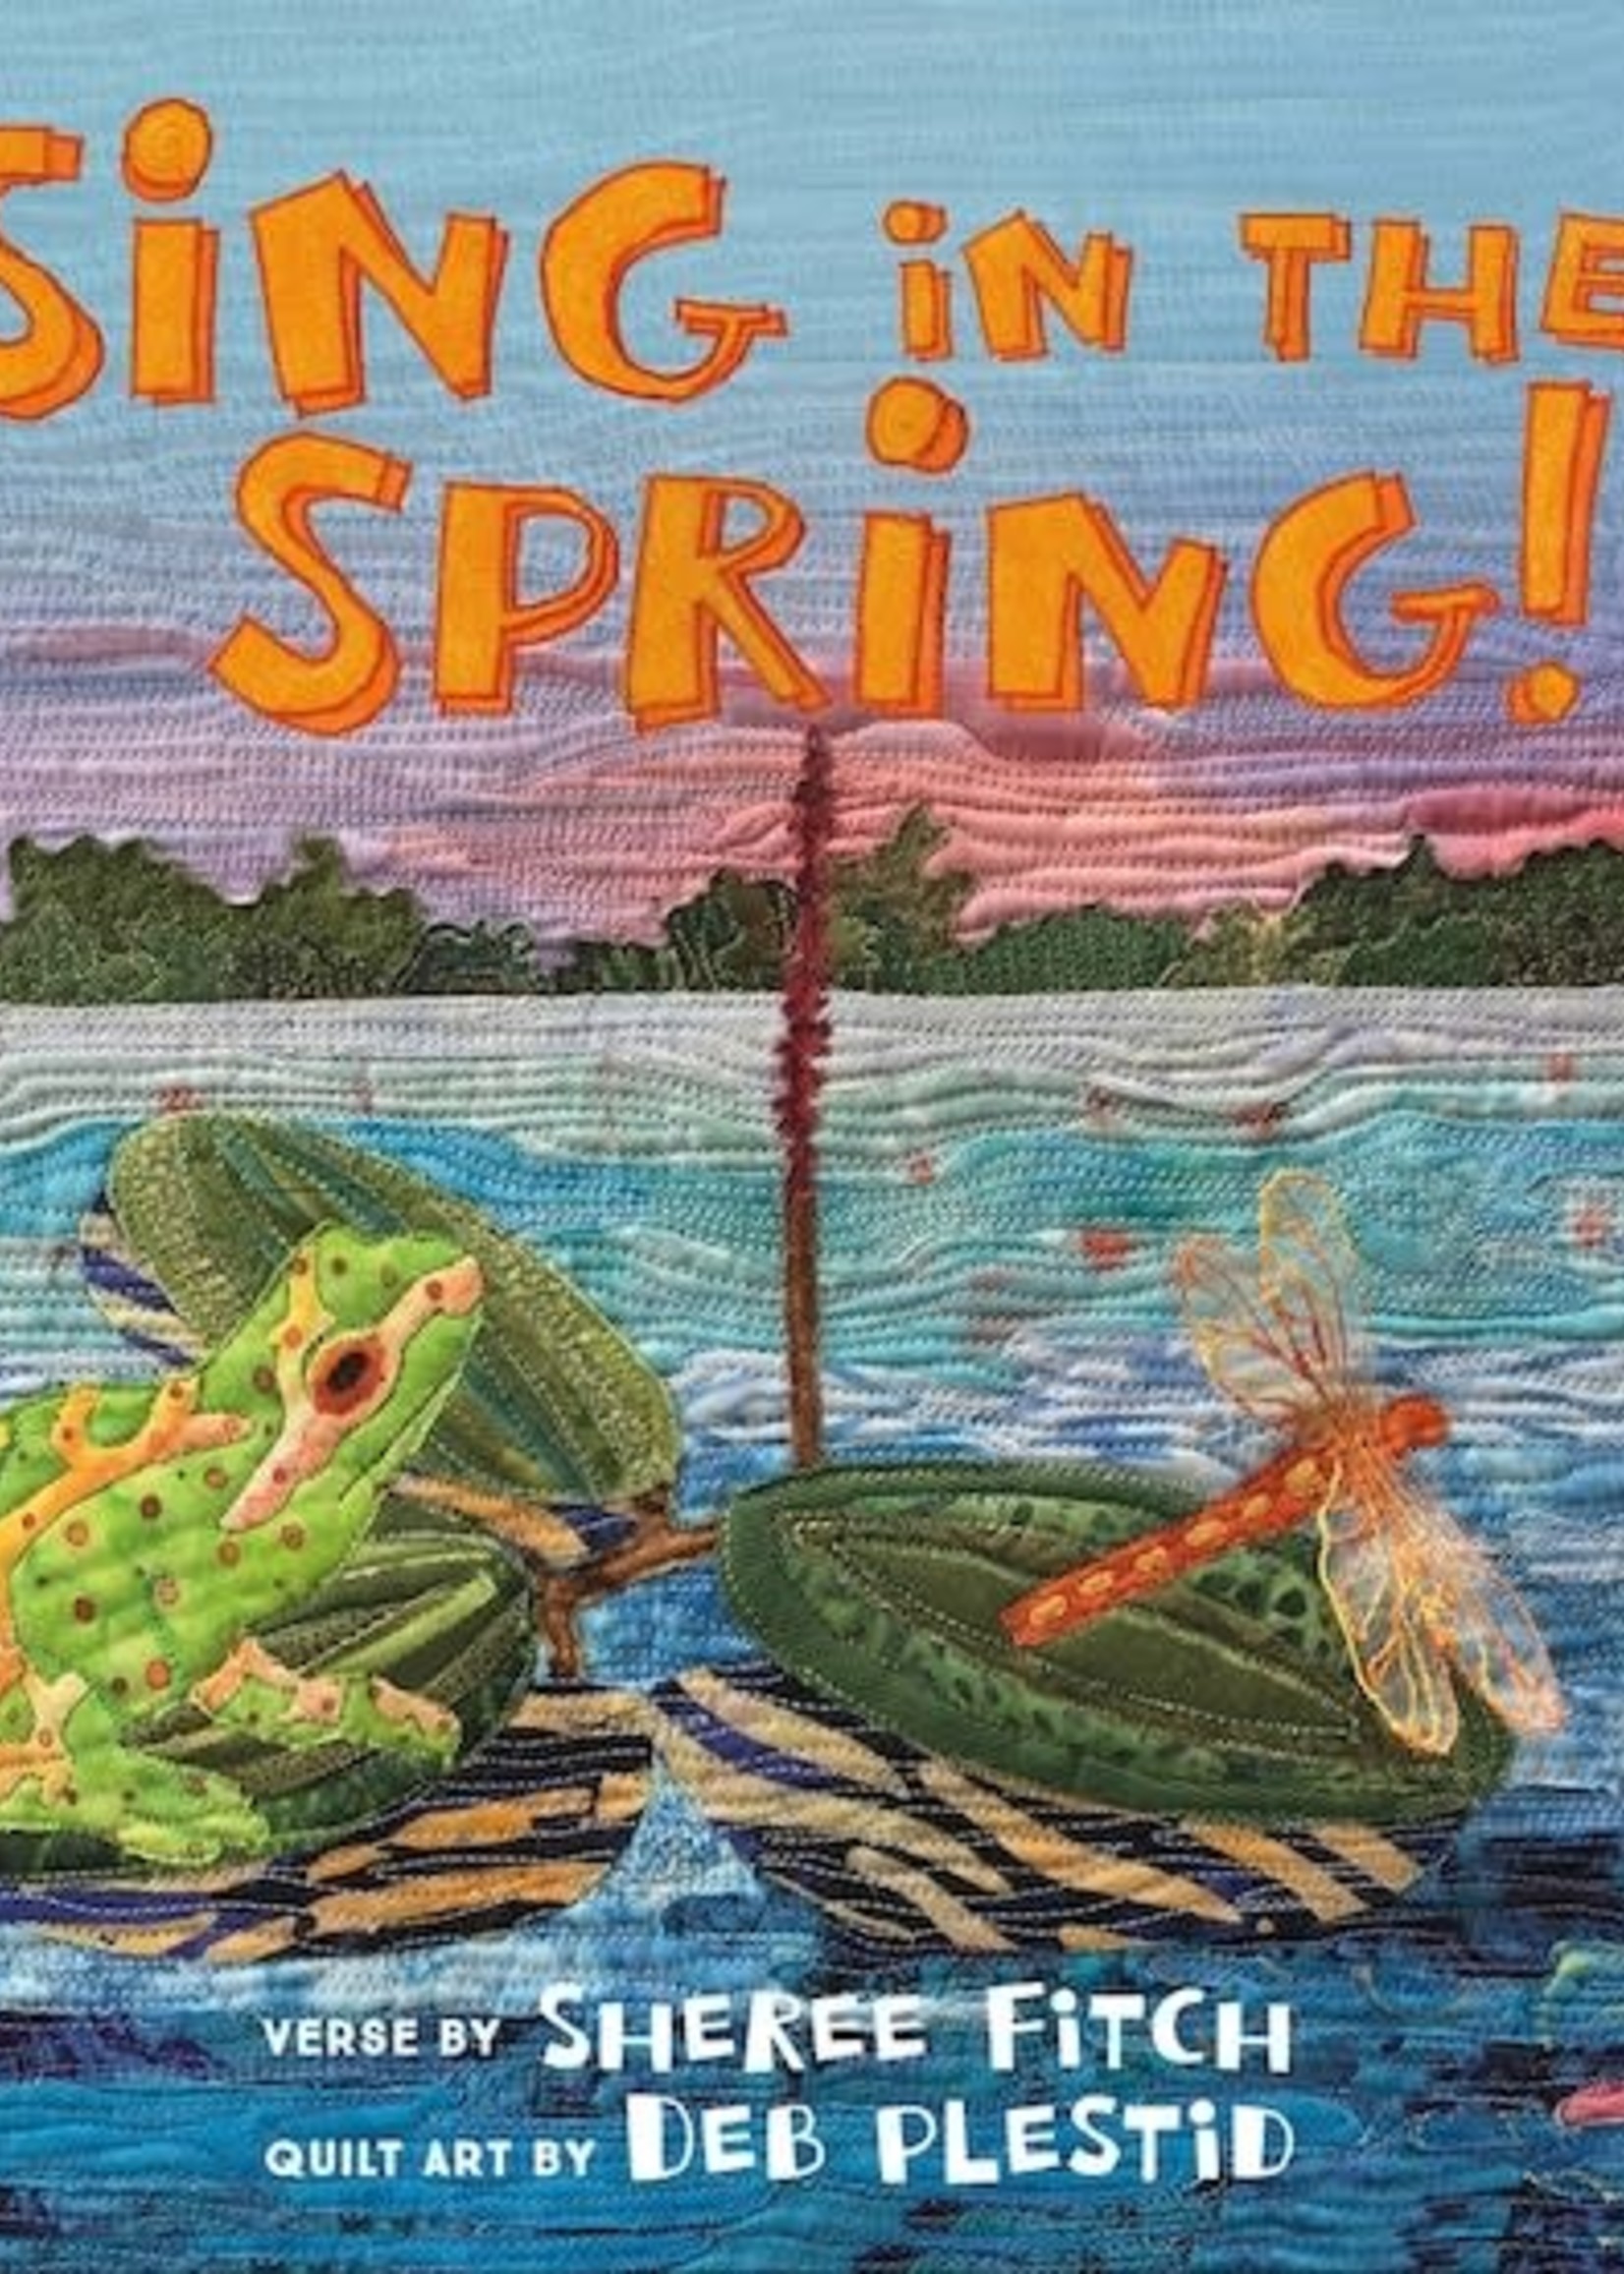 Sing in the Spring! by Sheree Fitch